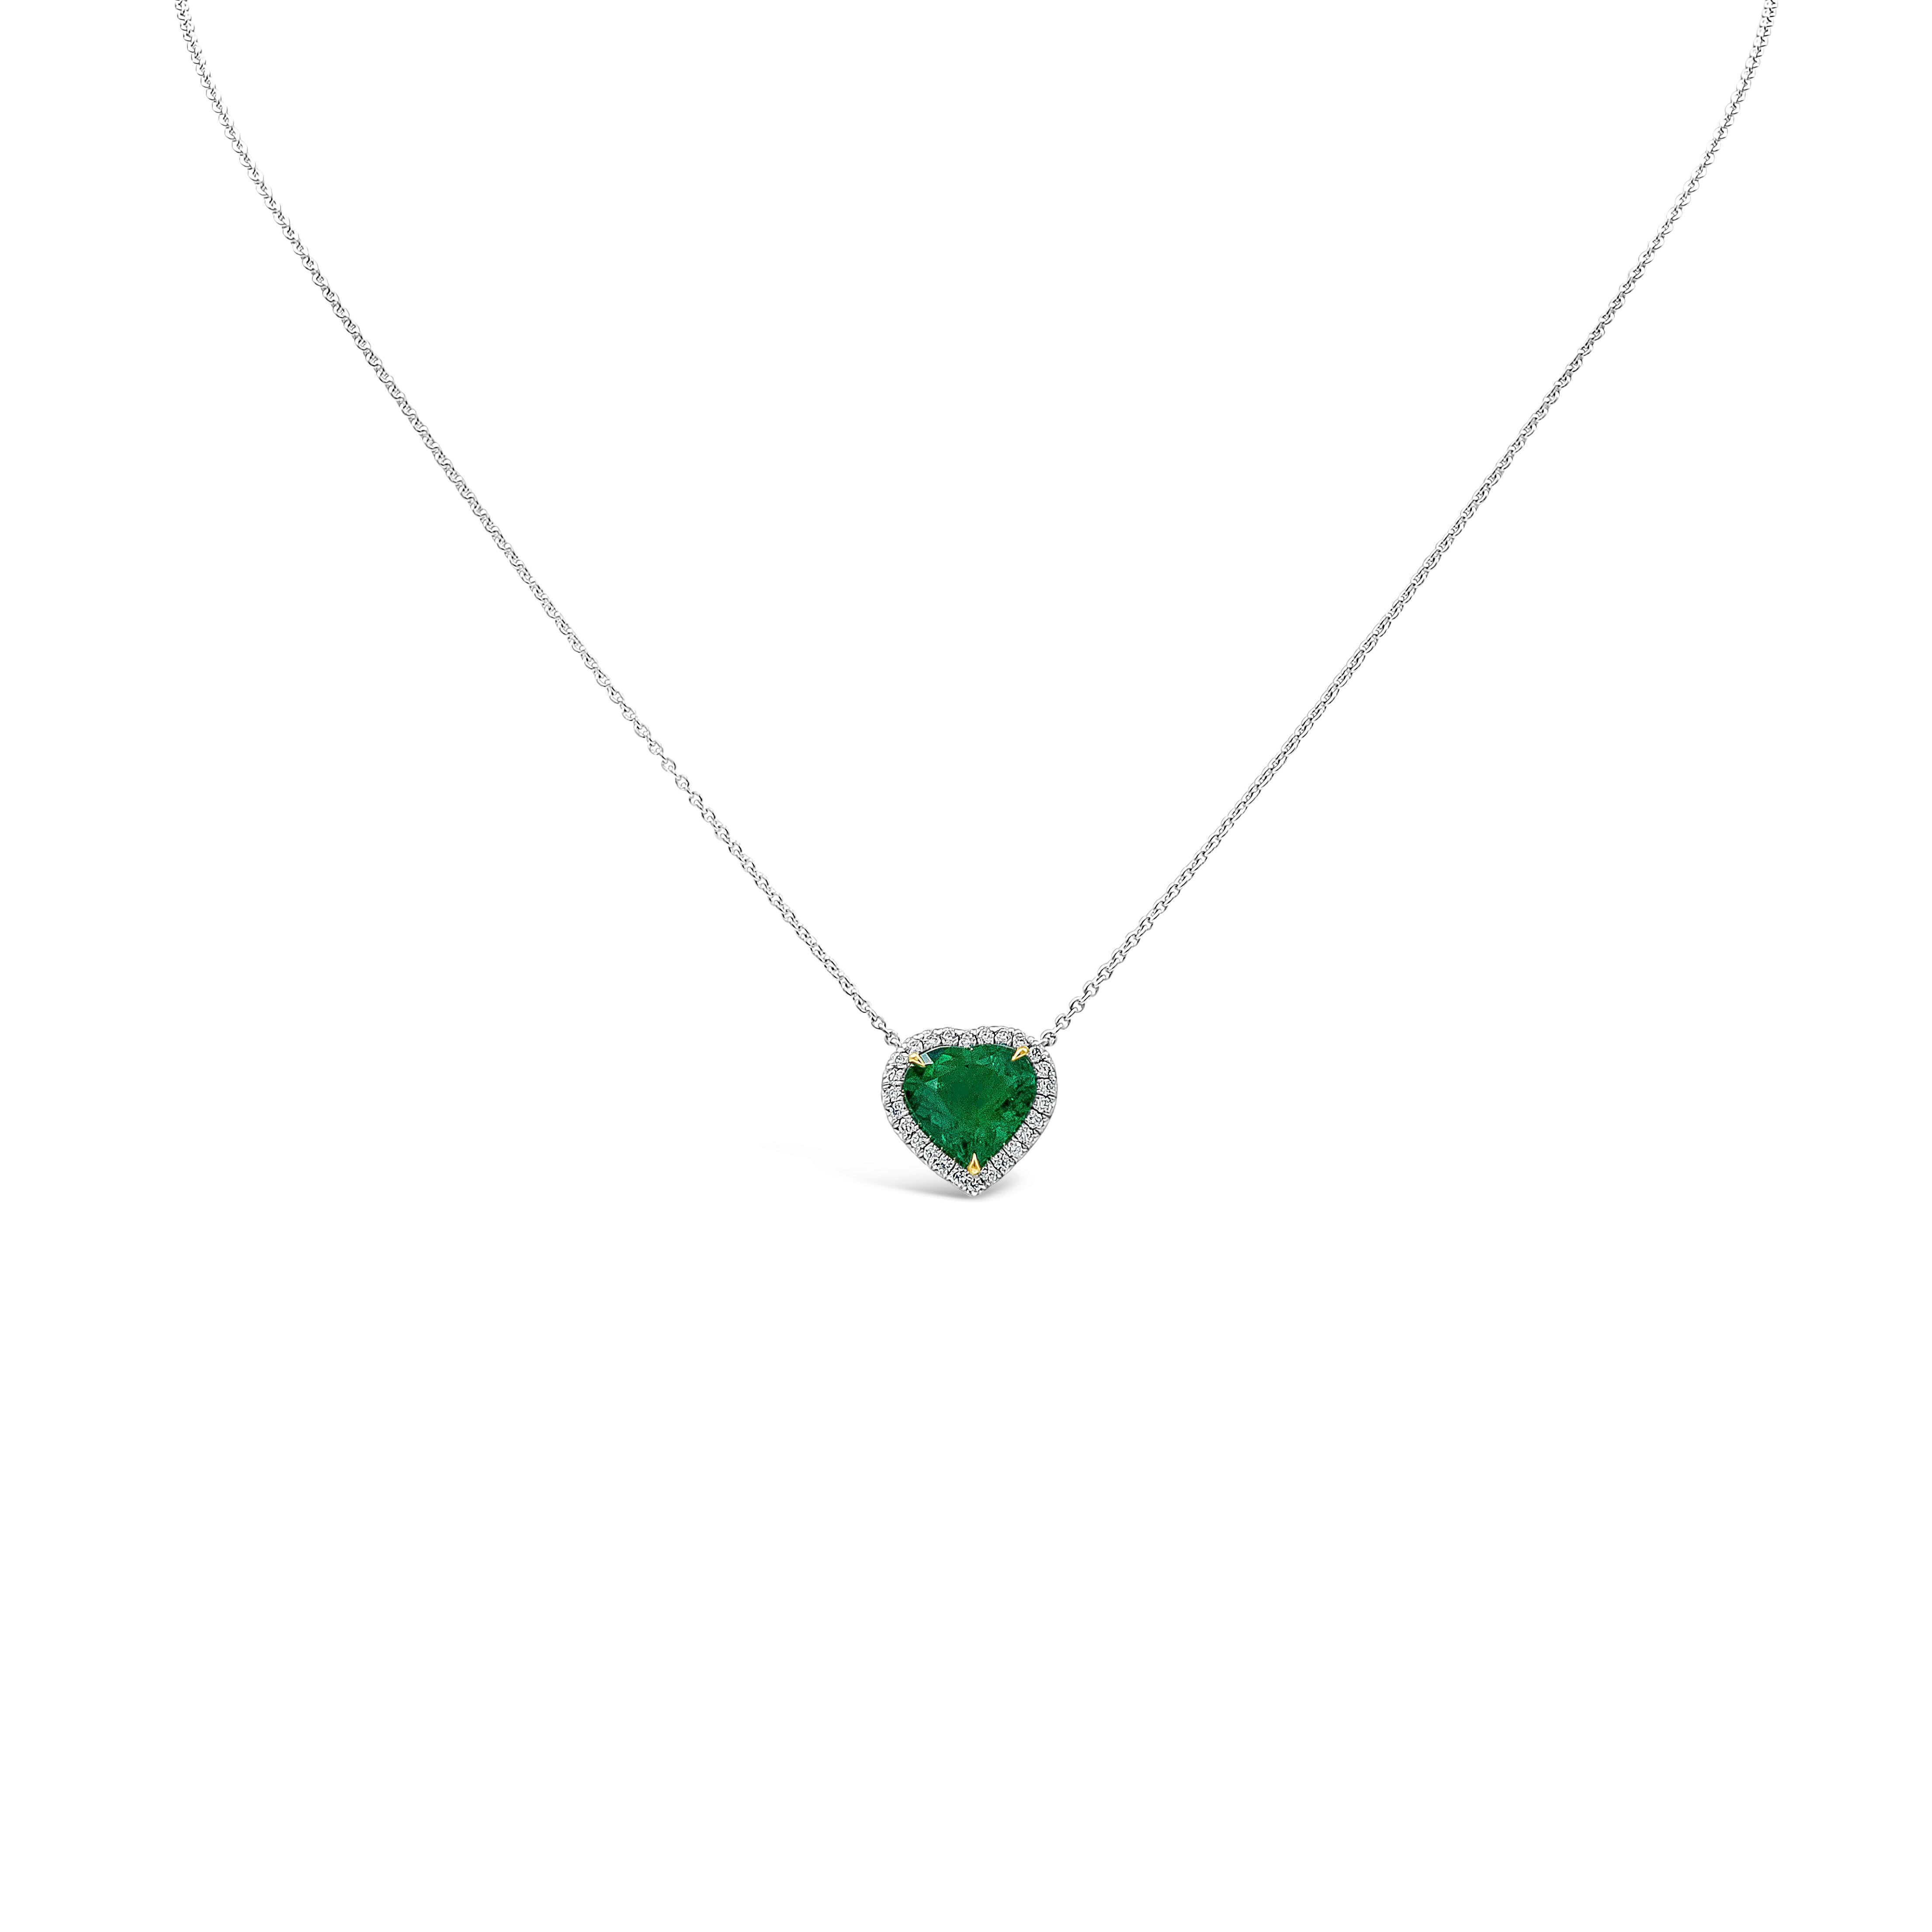 A rare piece of jewelry showcasing a C. Dunaigre Certified 2.33 carat colombian vivid green emerald in a heart shape, VS in Clarity. Surrounded by a single row of round brilliant diamonds weighing 0.21 carats total, F Color and VS in Clarity. having